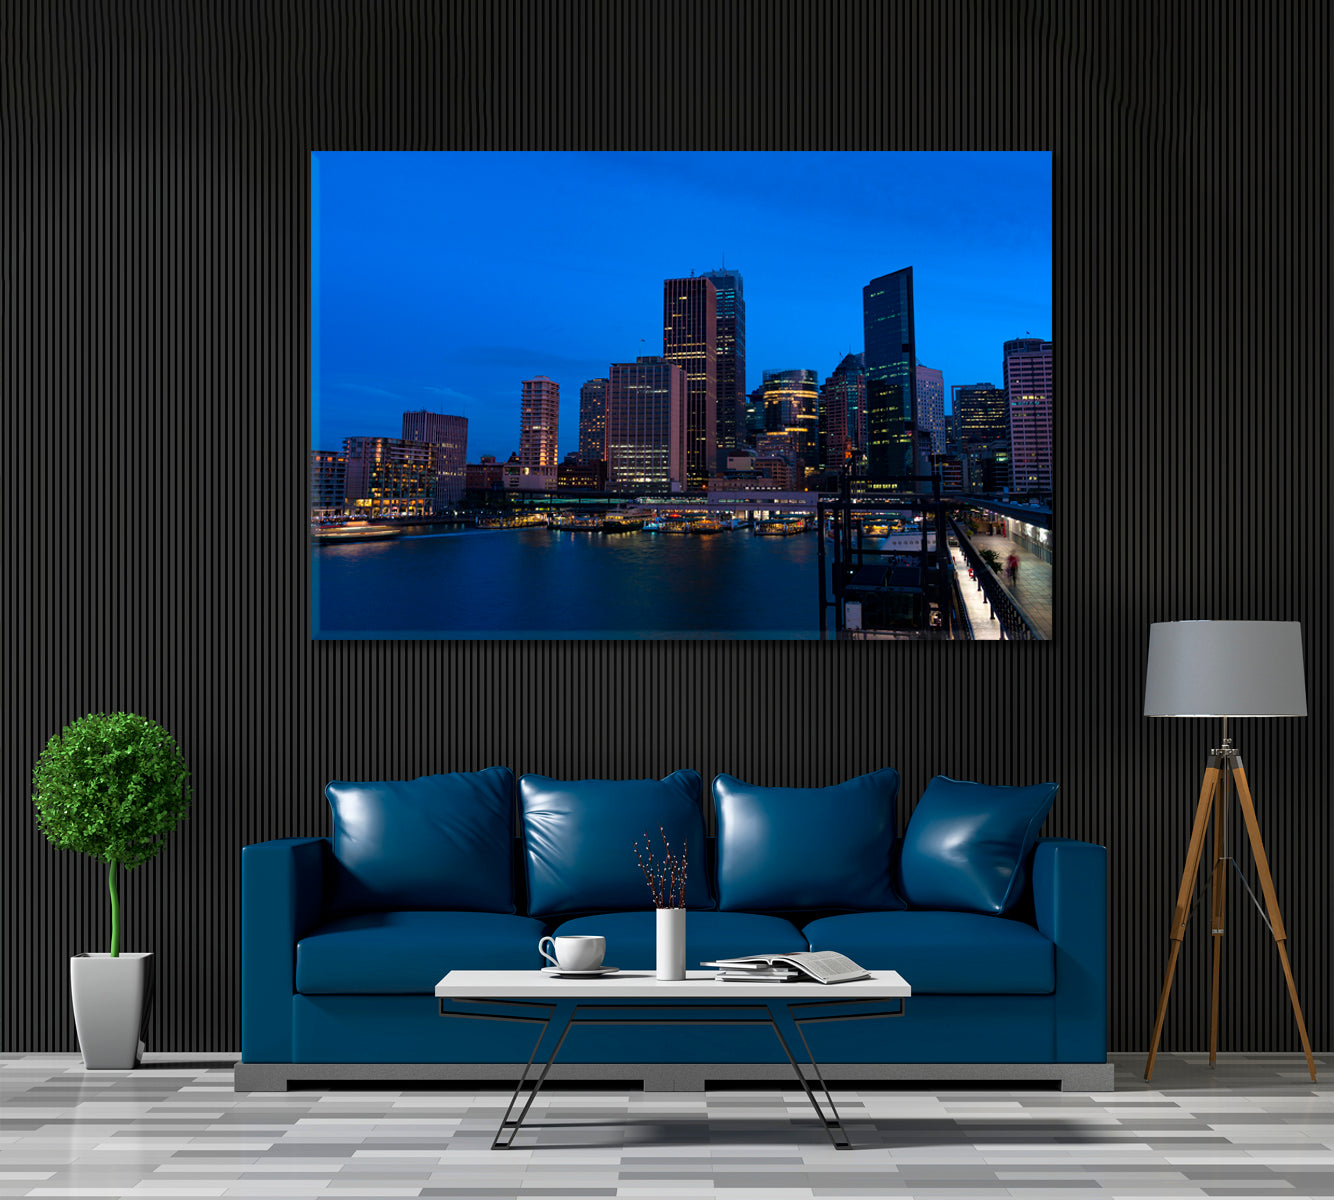 Sydney Central Business District Australia Canvas Print ArtLexy 1 Panel 24"x16" inches 